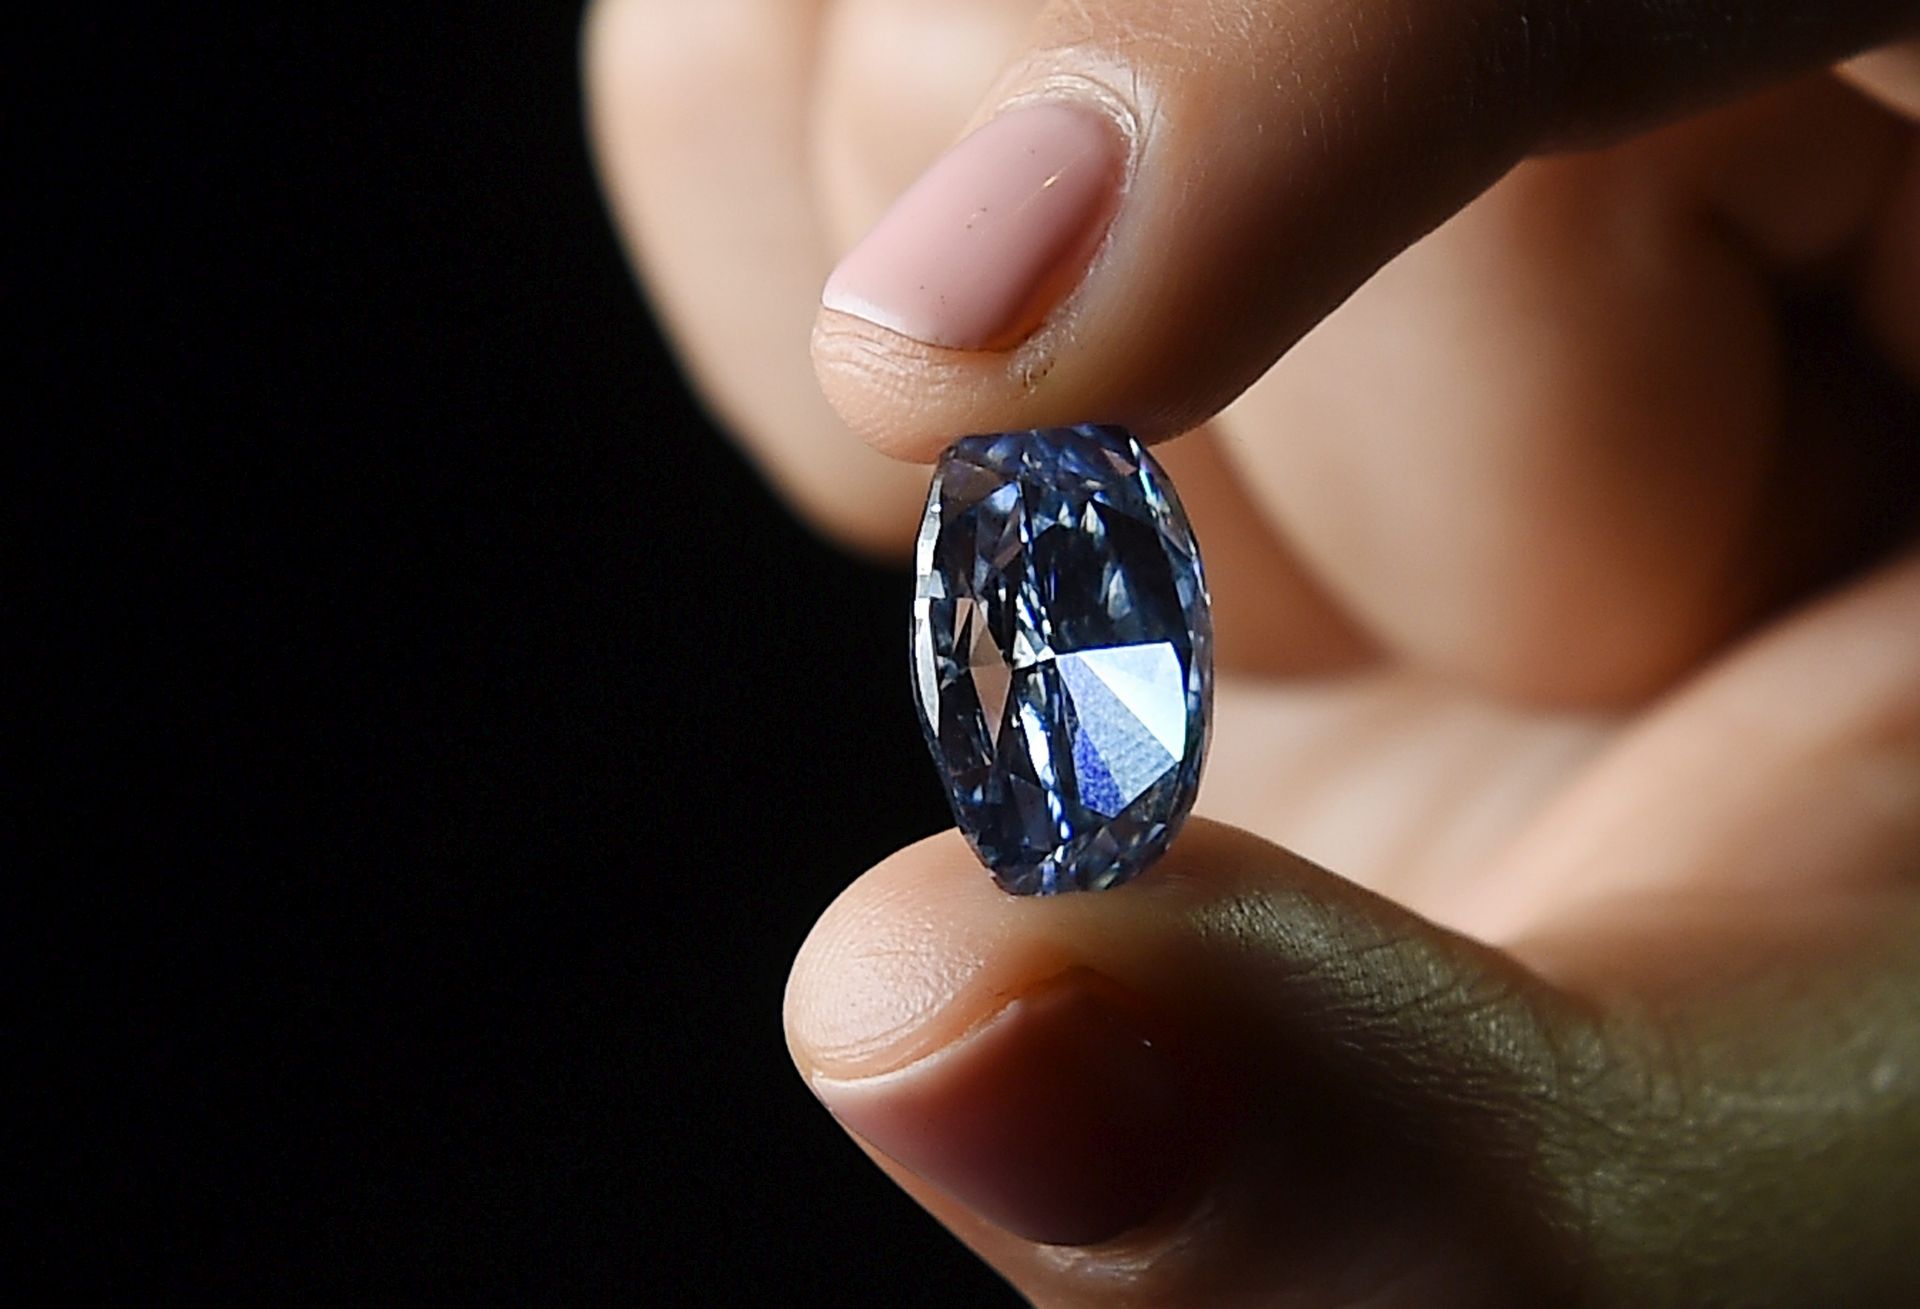 epa05212530 A Sotheby's staff holds the DeBeers Millennium Jewel 4 at Sotheby's auction house in London, Britain, 15 March 2016. The rare 10.10 carat oval internally flawless fancy vivid blue diamond is to lead Sotheby's Hong Kong spring sale on 05 April 2016. It is the largest oval vivid blue diamond ever to appear at auction and is estimated to fetch 30-35 million US dollars (about 27-32 million EUR).  EPA/ANDY RAIN